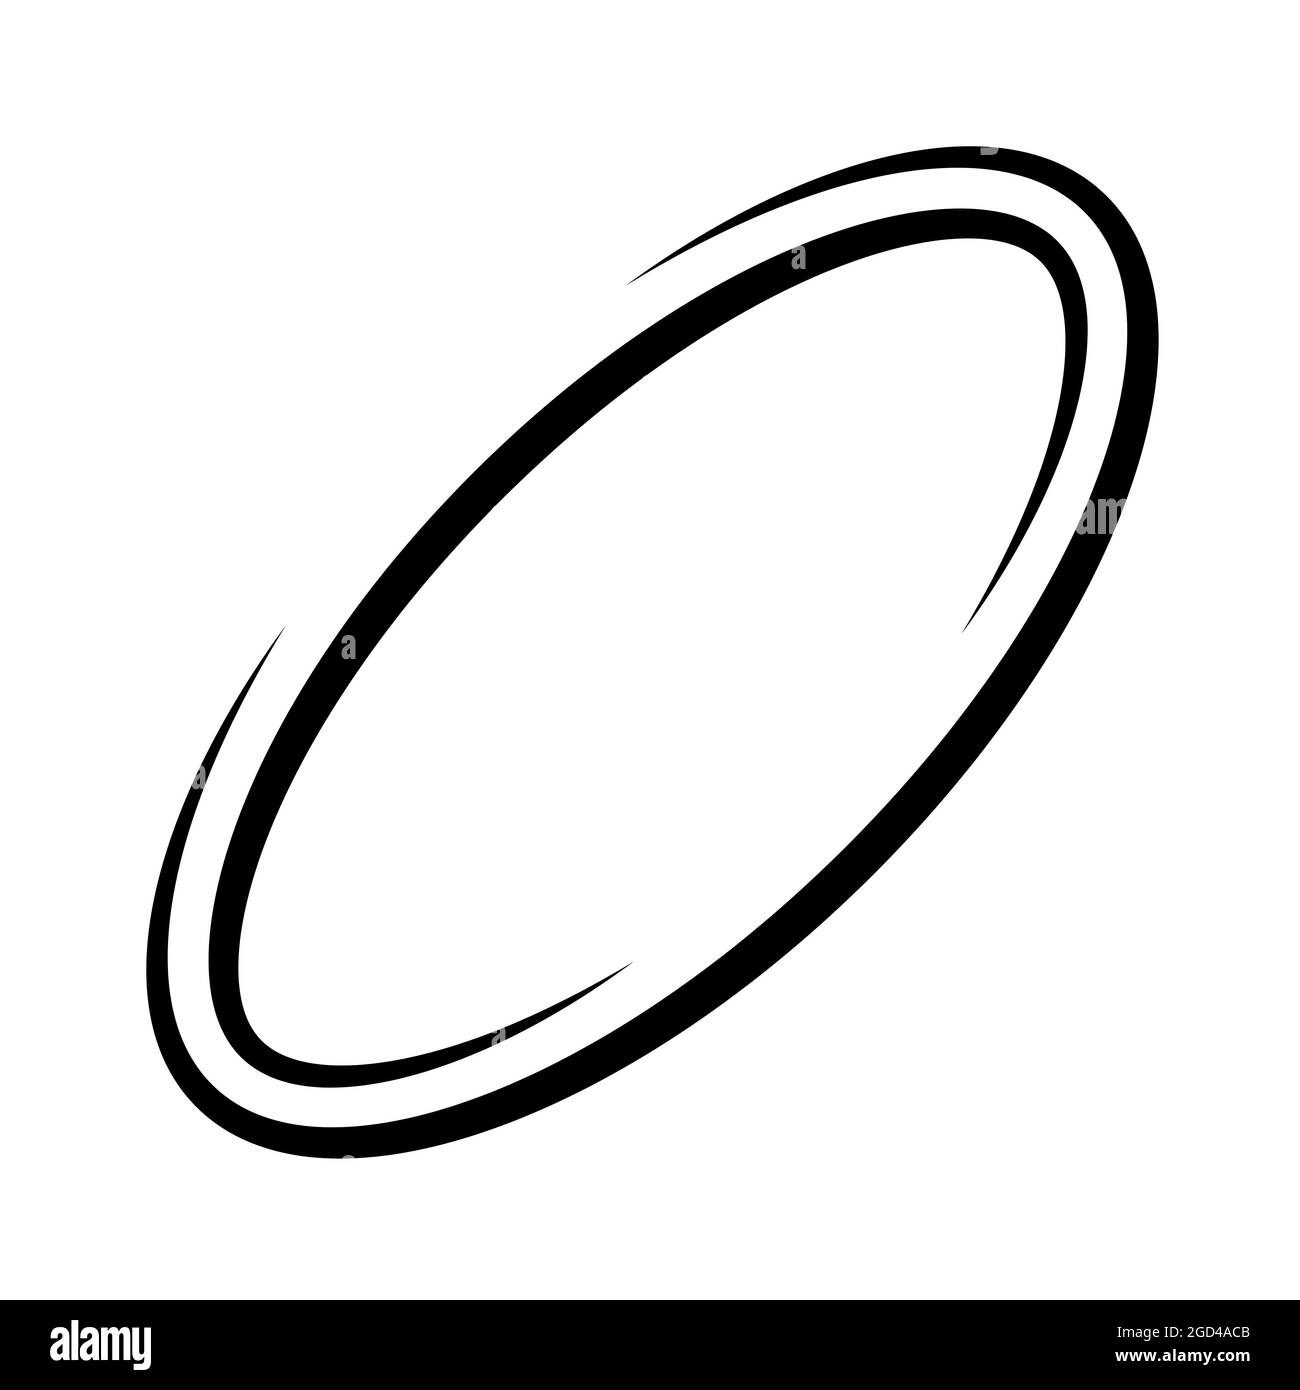 Letter o zero ring planet saturn swoosh oval icon vector logo template illustration Stock Vector